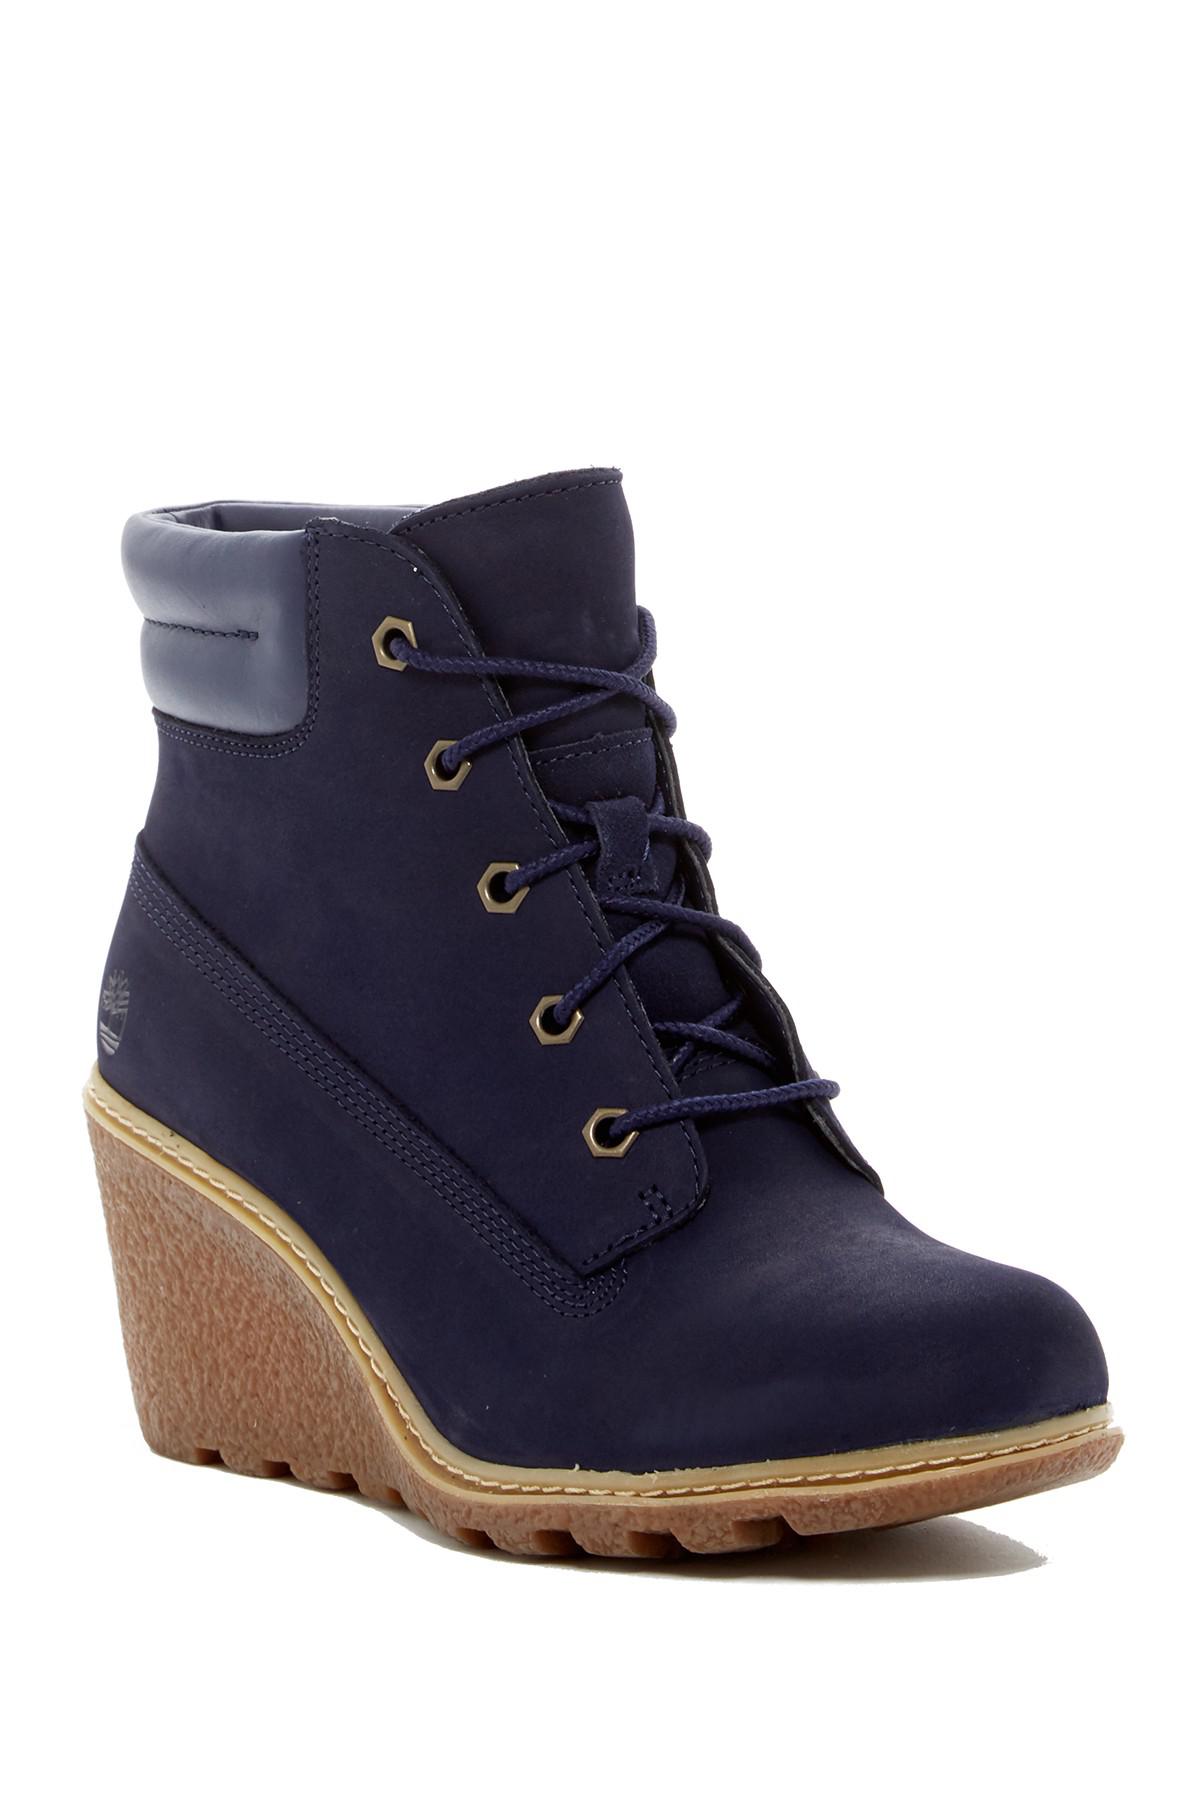 Timberland Amston 6" Nubuck Wedge Boot in Blue | Lyst